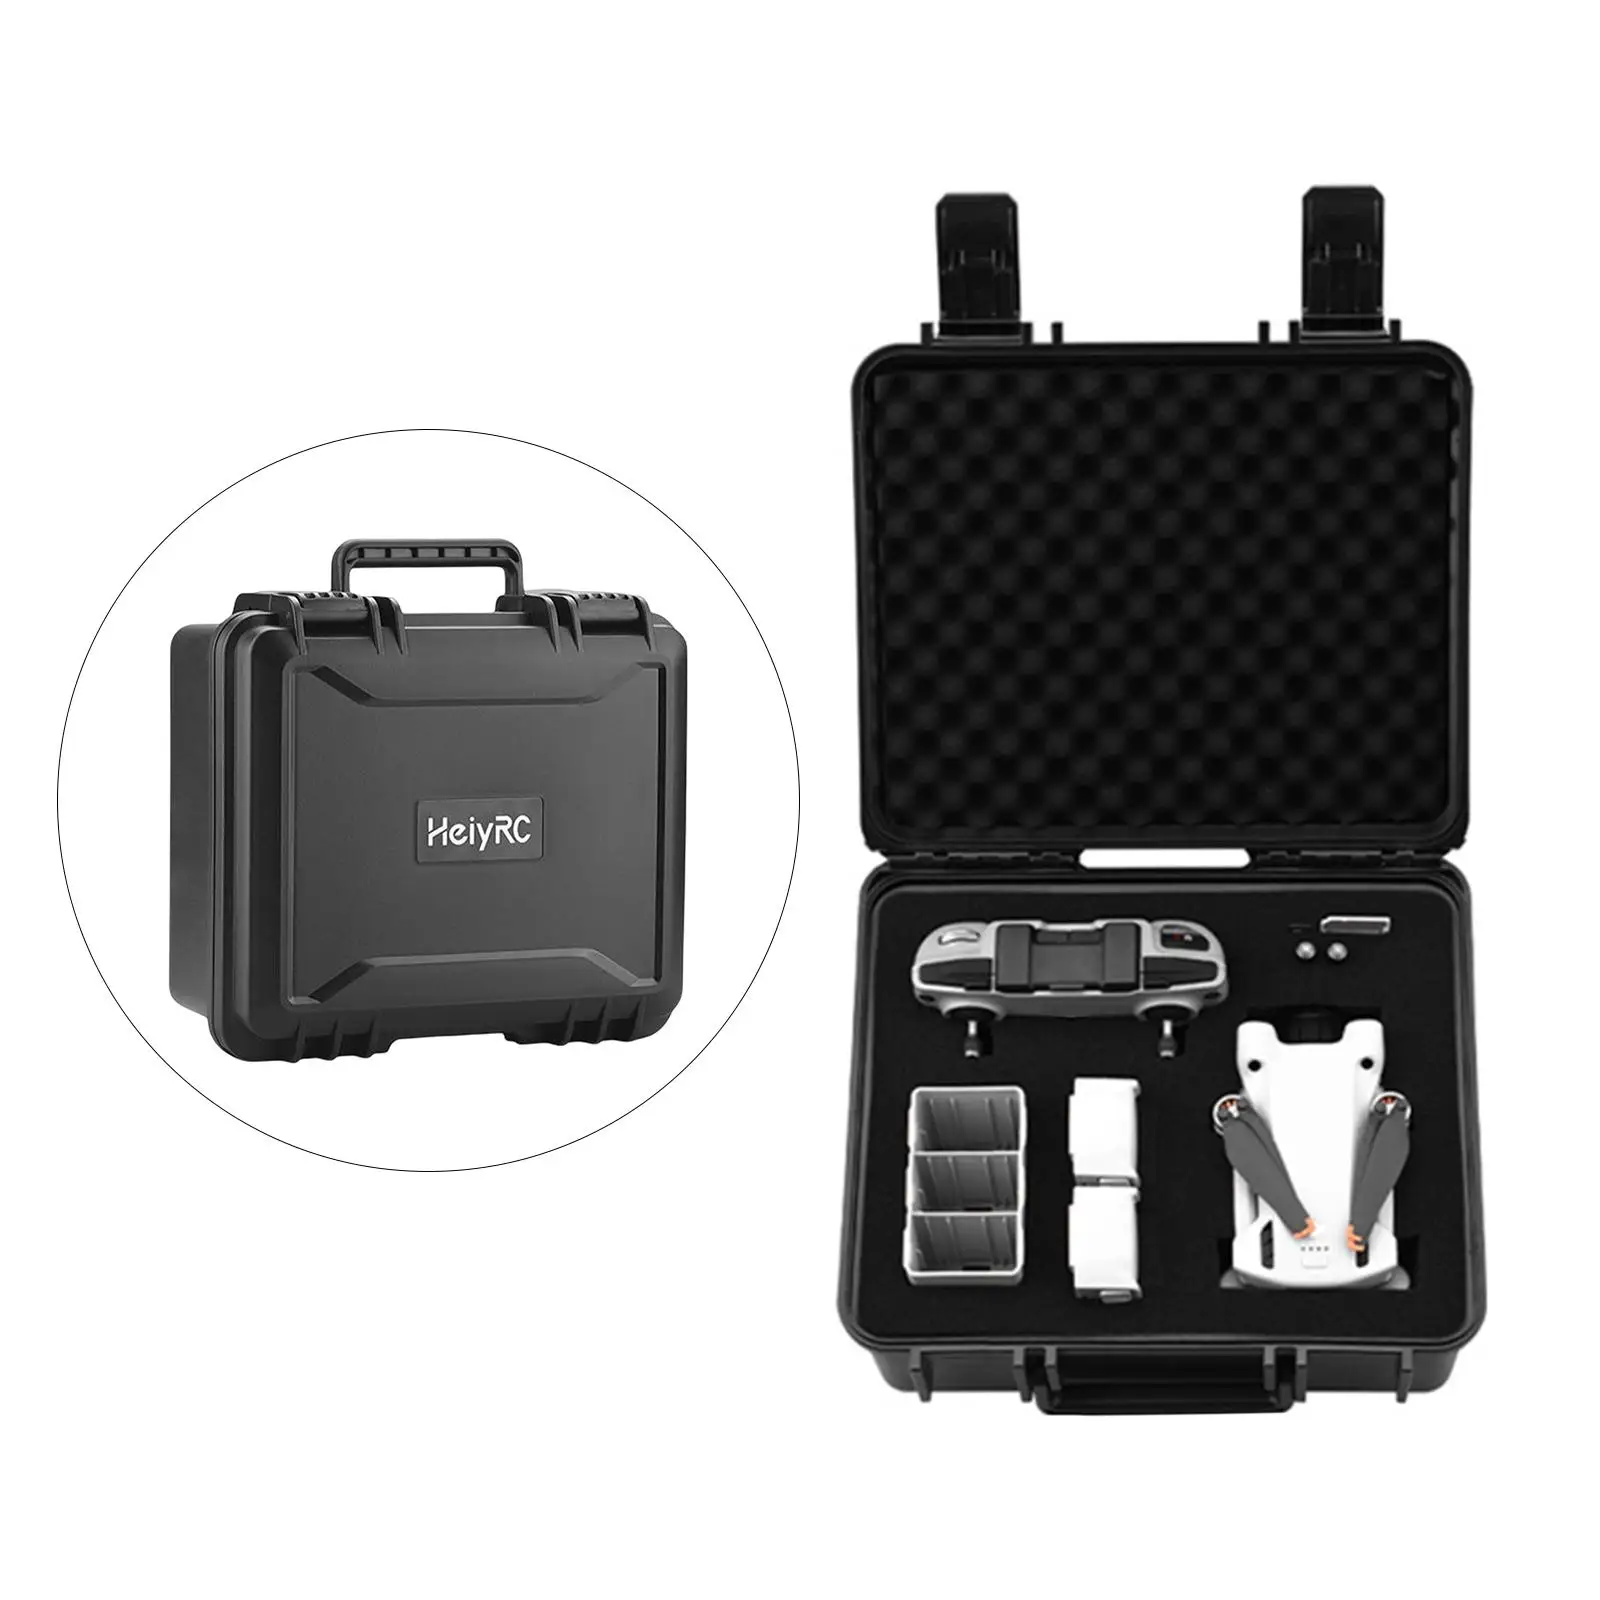 Portable Carrying Case Water Resistant  Body Storage Shockproof Electronic Equipment Storage Case Protective Box   RC N1